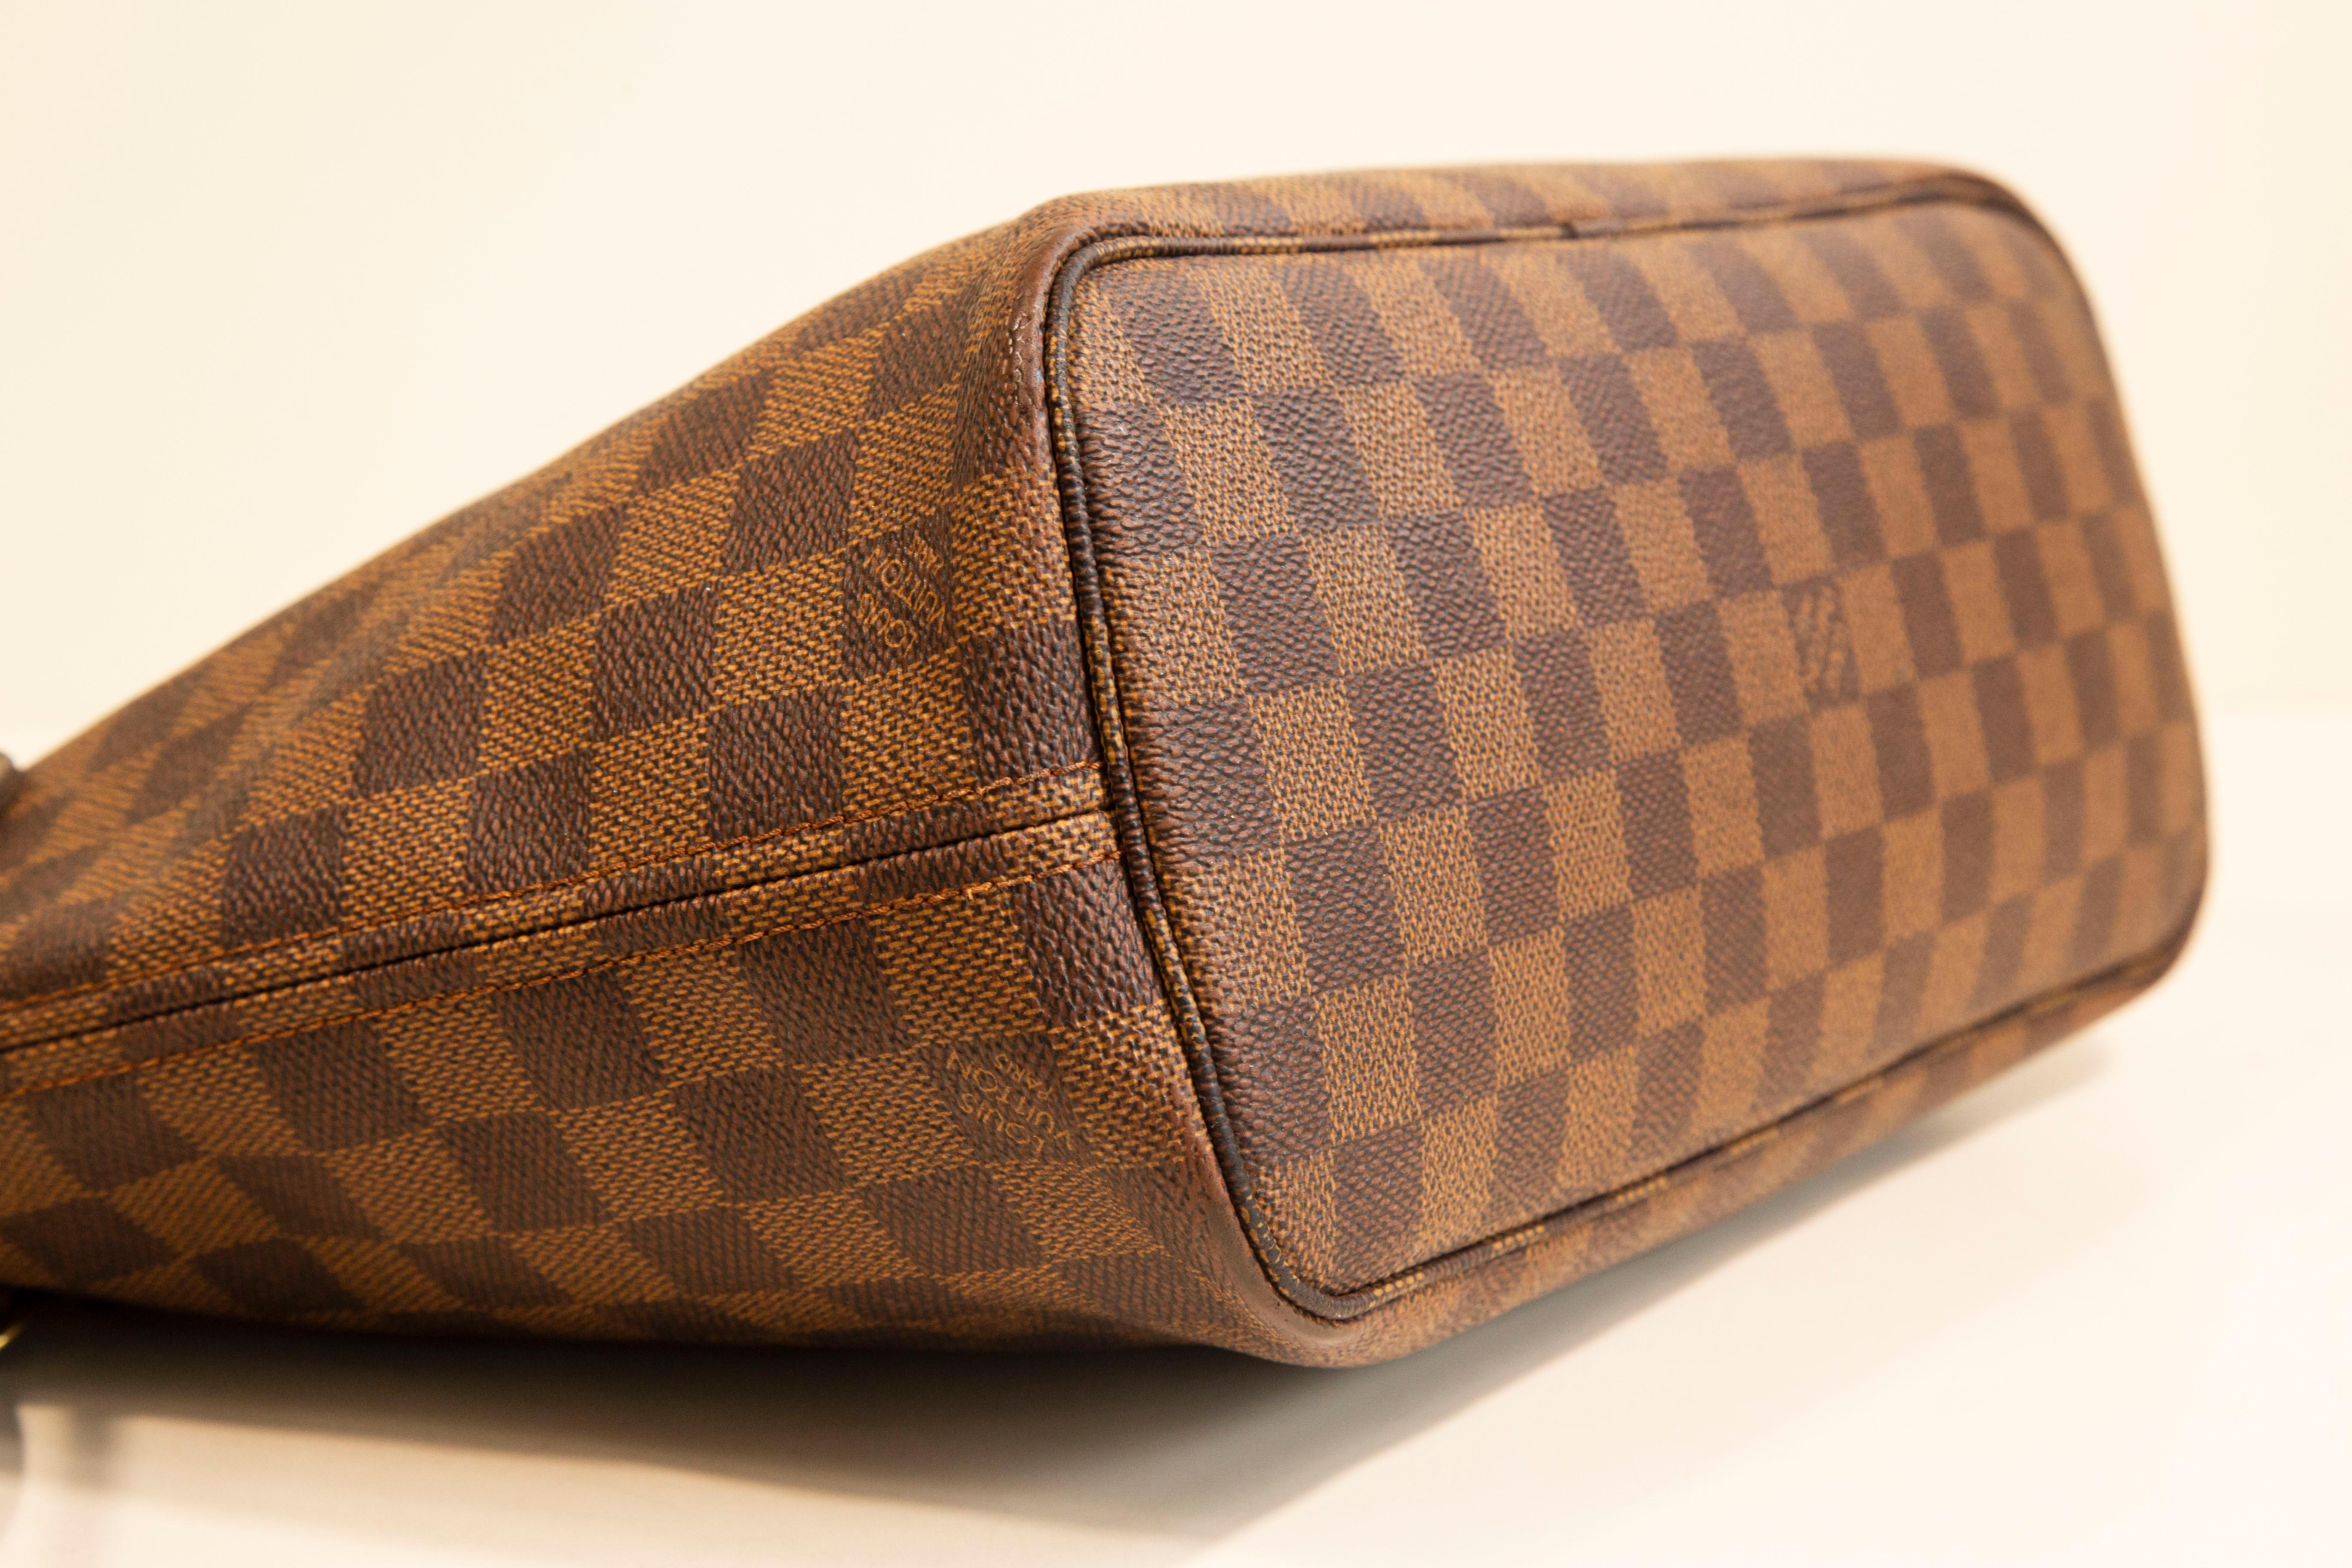 Louis Vuitton Neverfull PM Tote Shoulder Bag in Damier Ebene For Sale 8